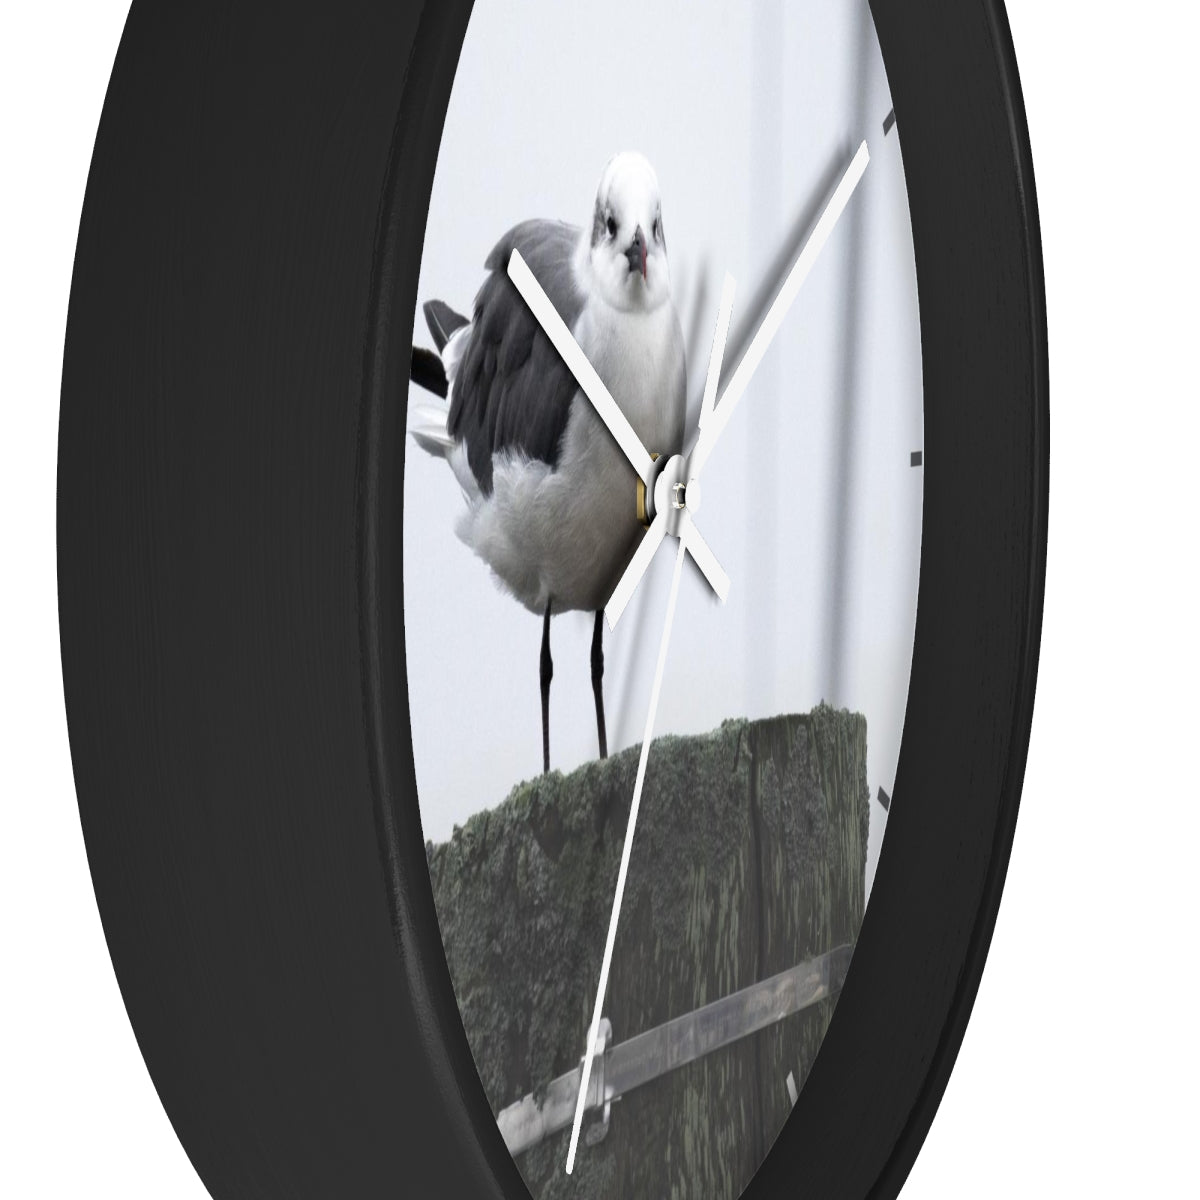 Gull on a Piling Wall clock